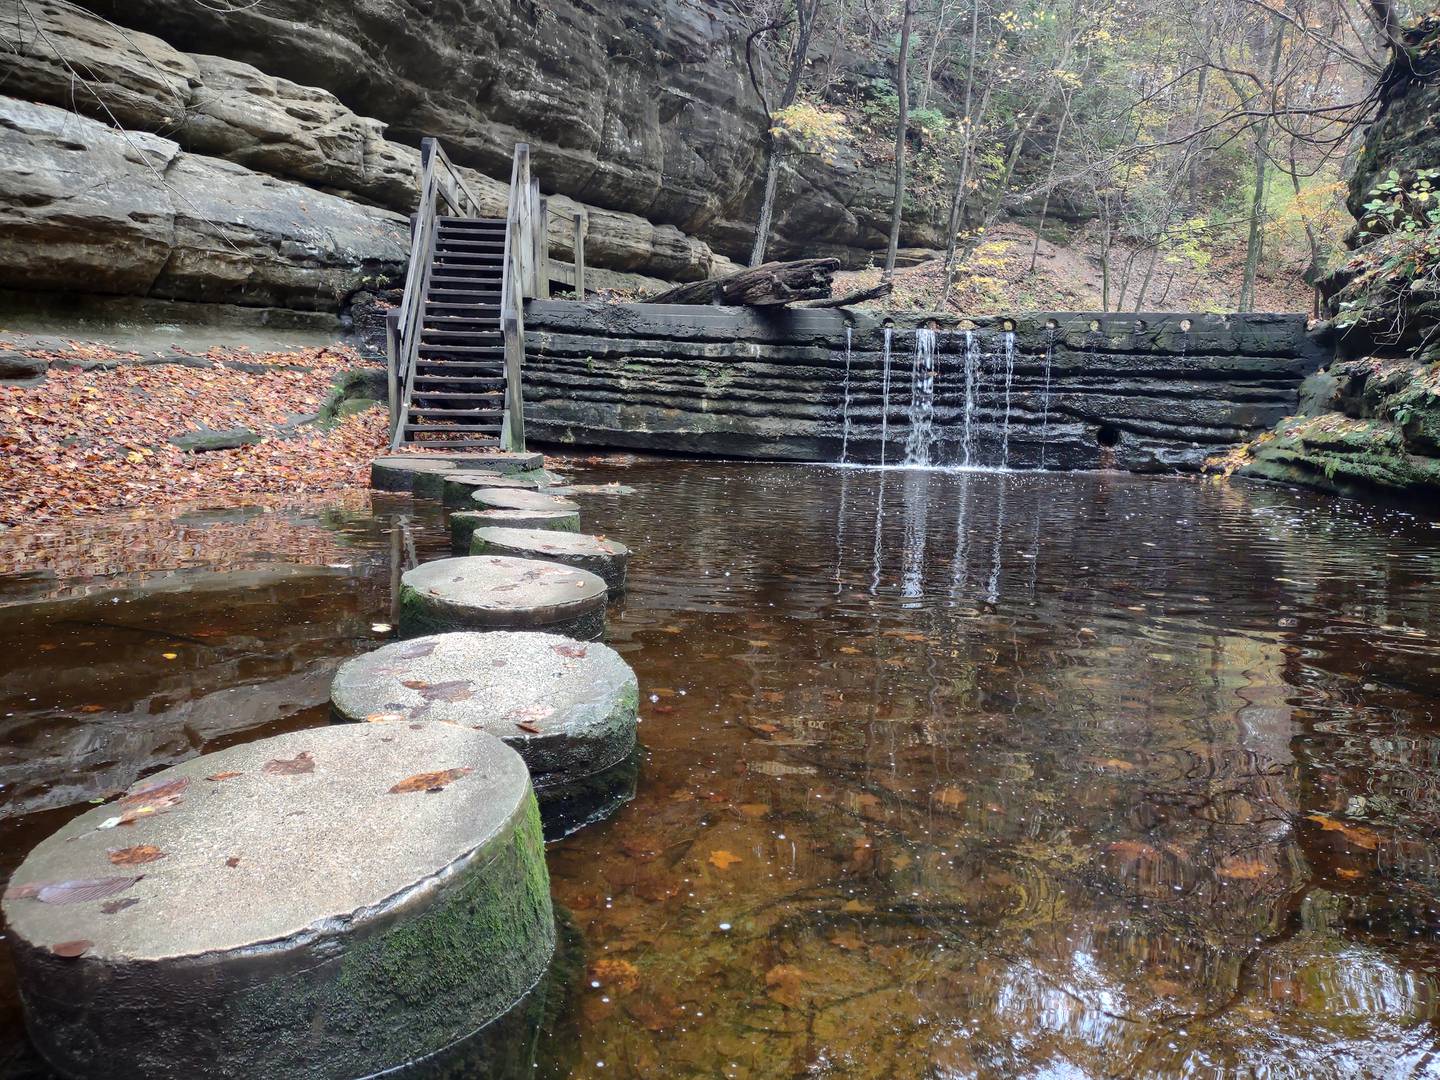 Stepping stones provide a dry path across the creek at Matthiessen State Park.